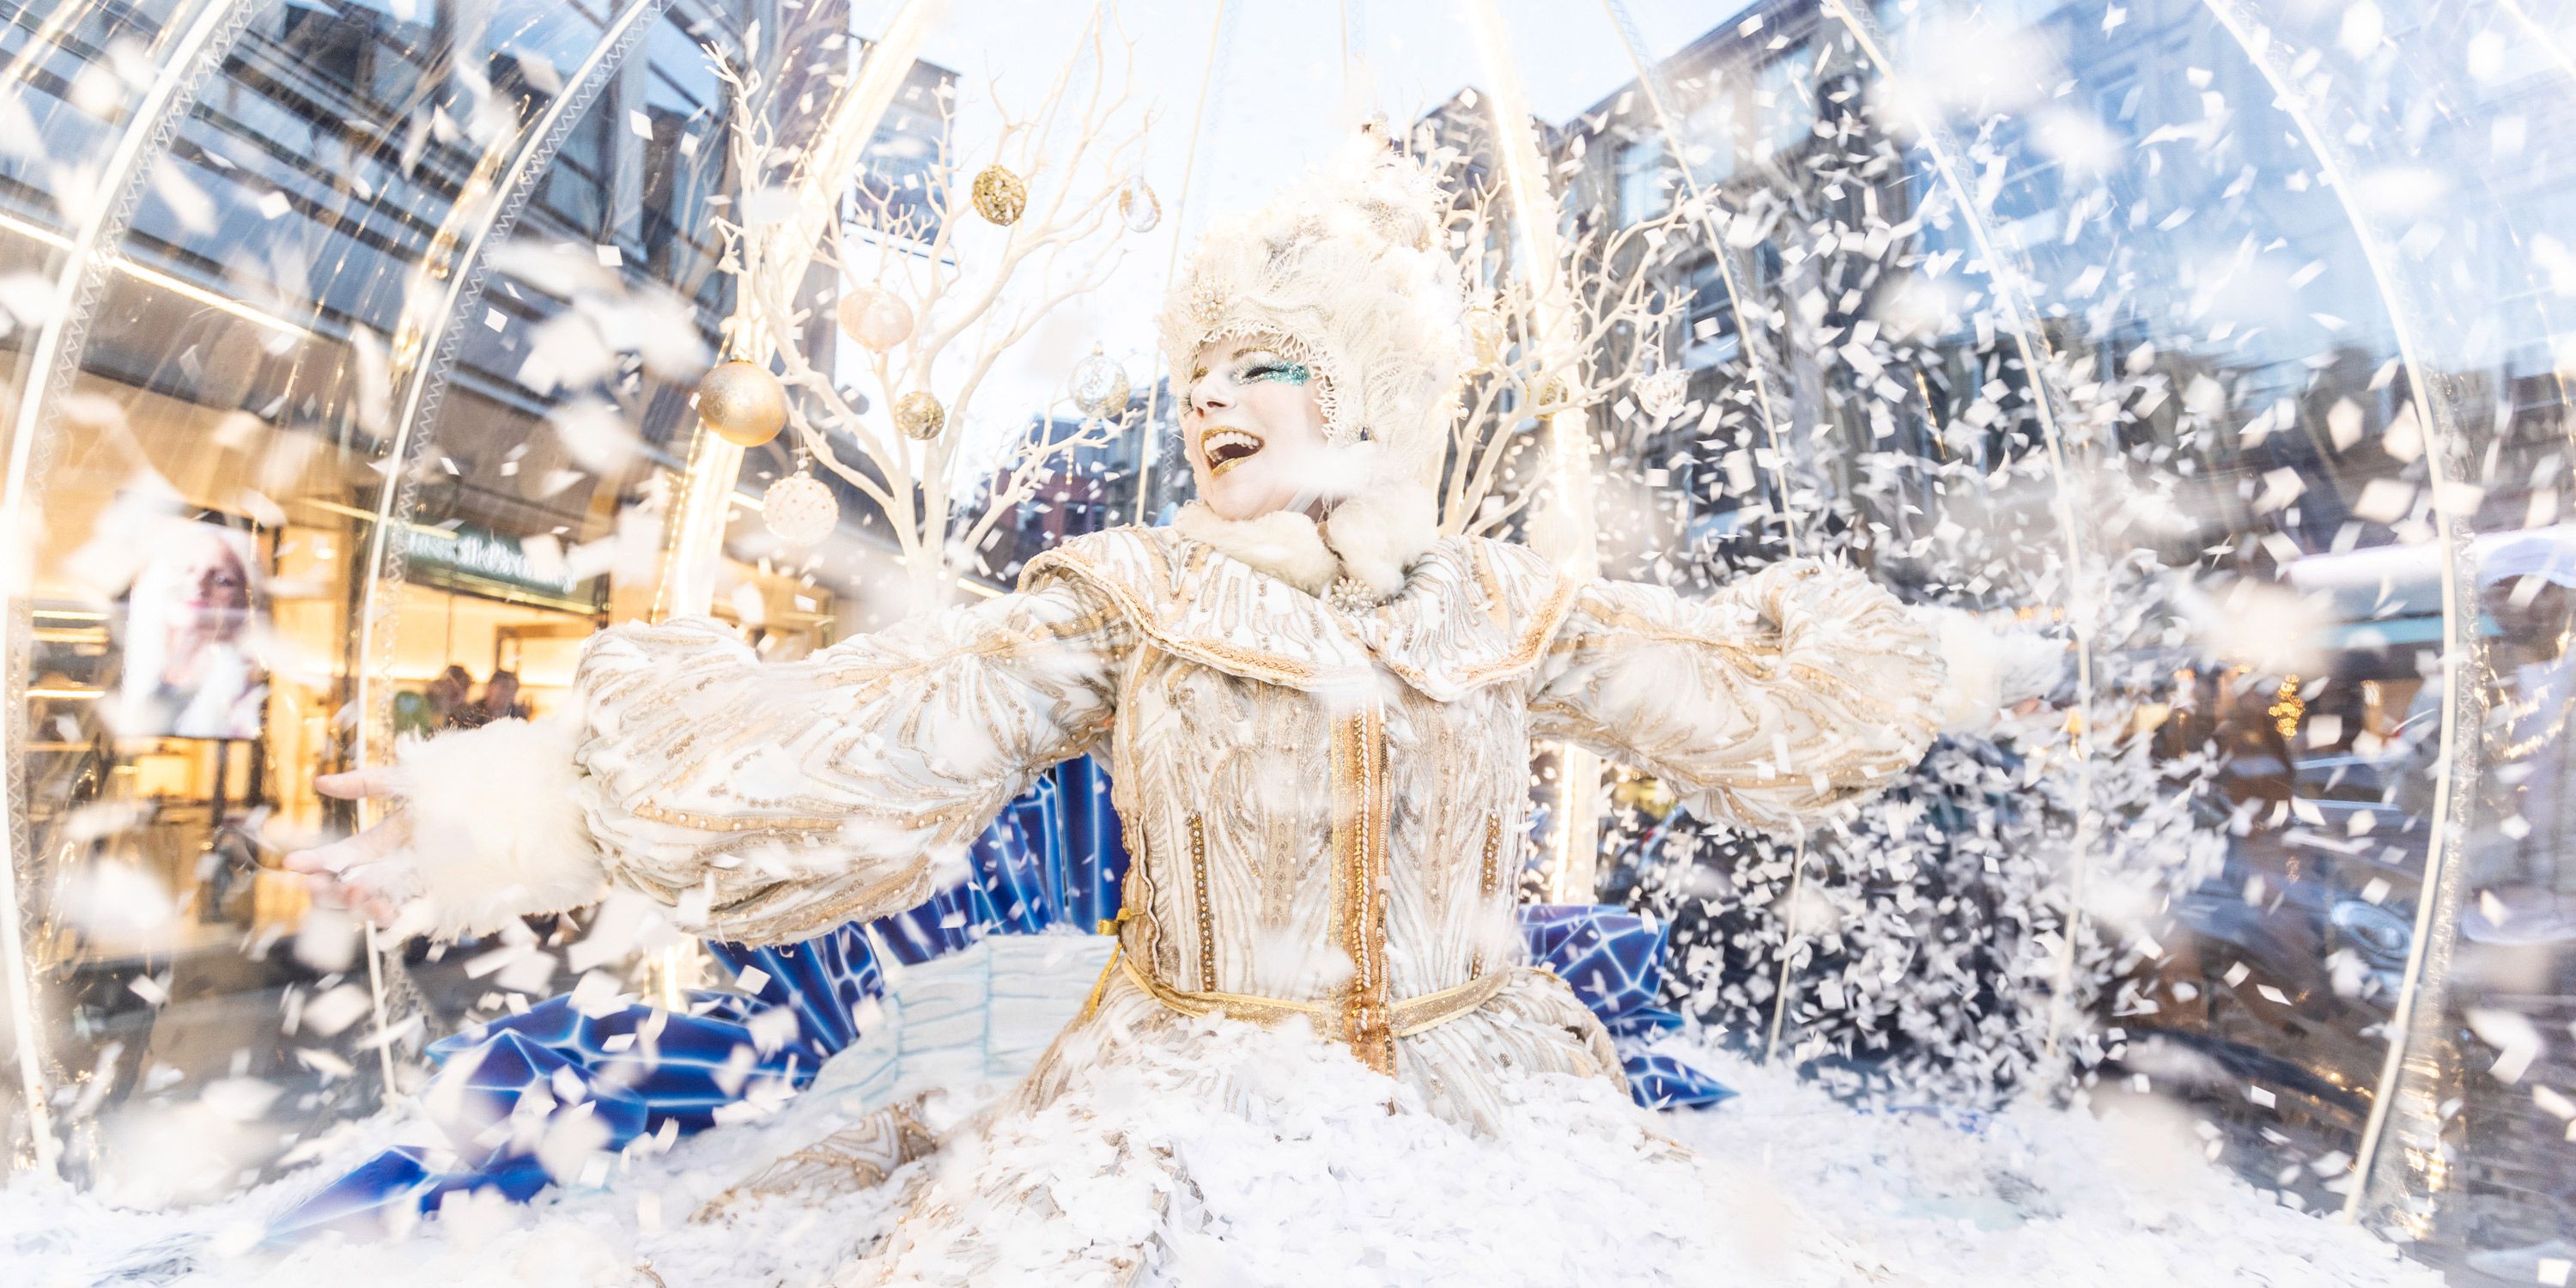 Festive Characters Conjure Winter Magic at Manchester’s Christmas Markets